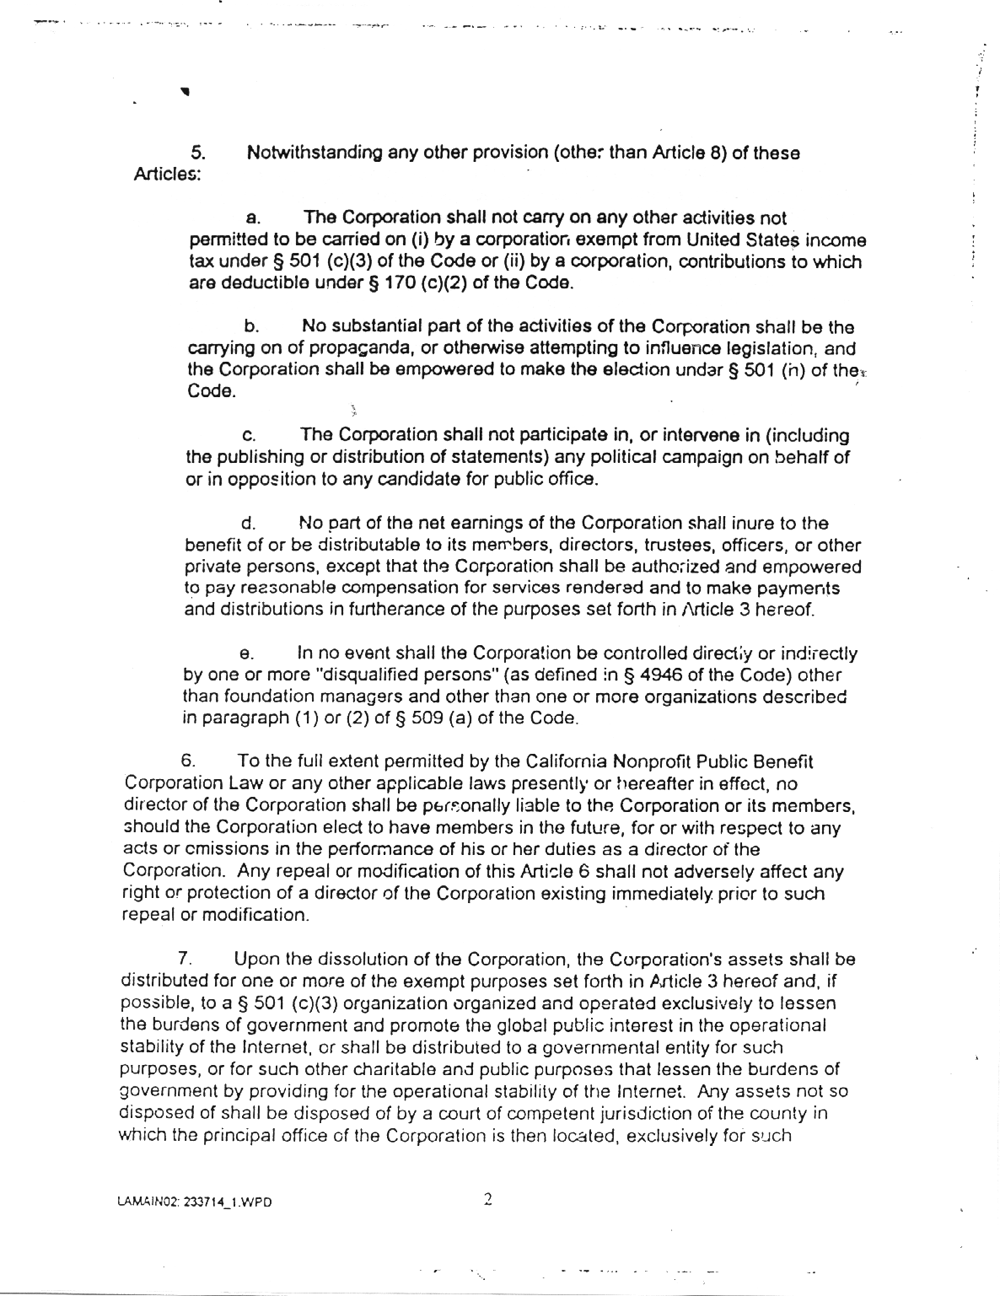 Articles of Incorporation of Internet Corporation for Assigned Names and Numbers, Page 2